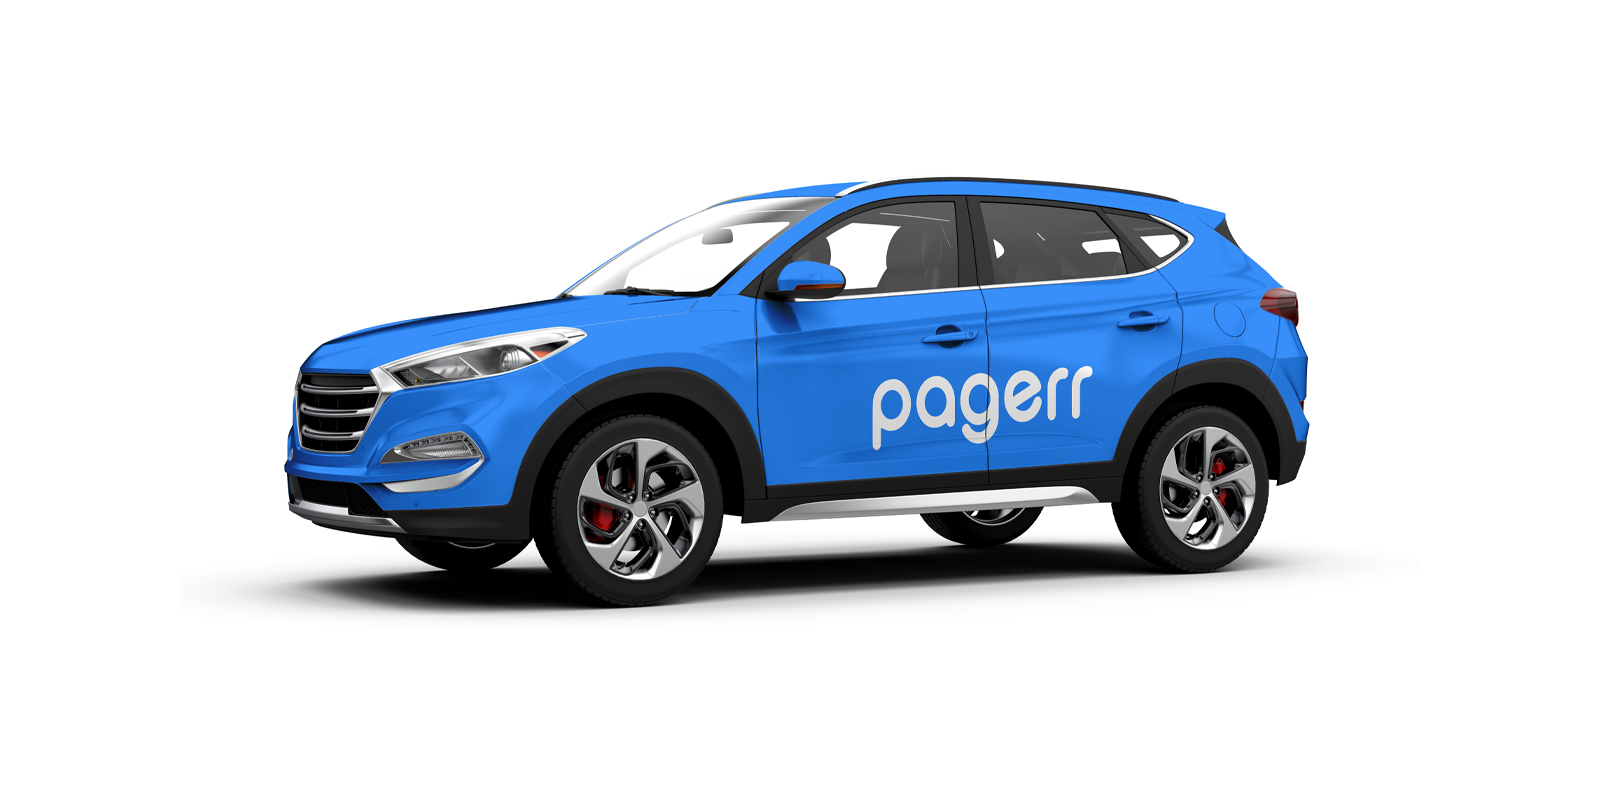 Car signs in Darwin - Print with Pagerr